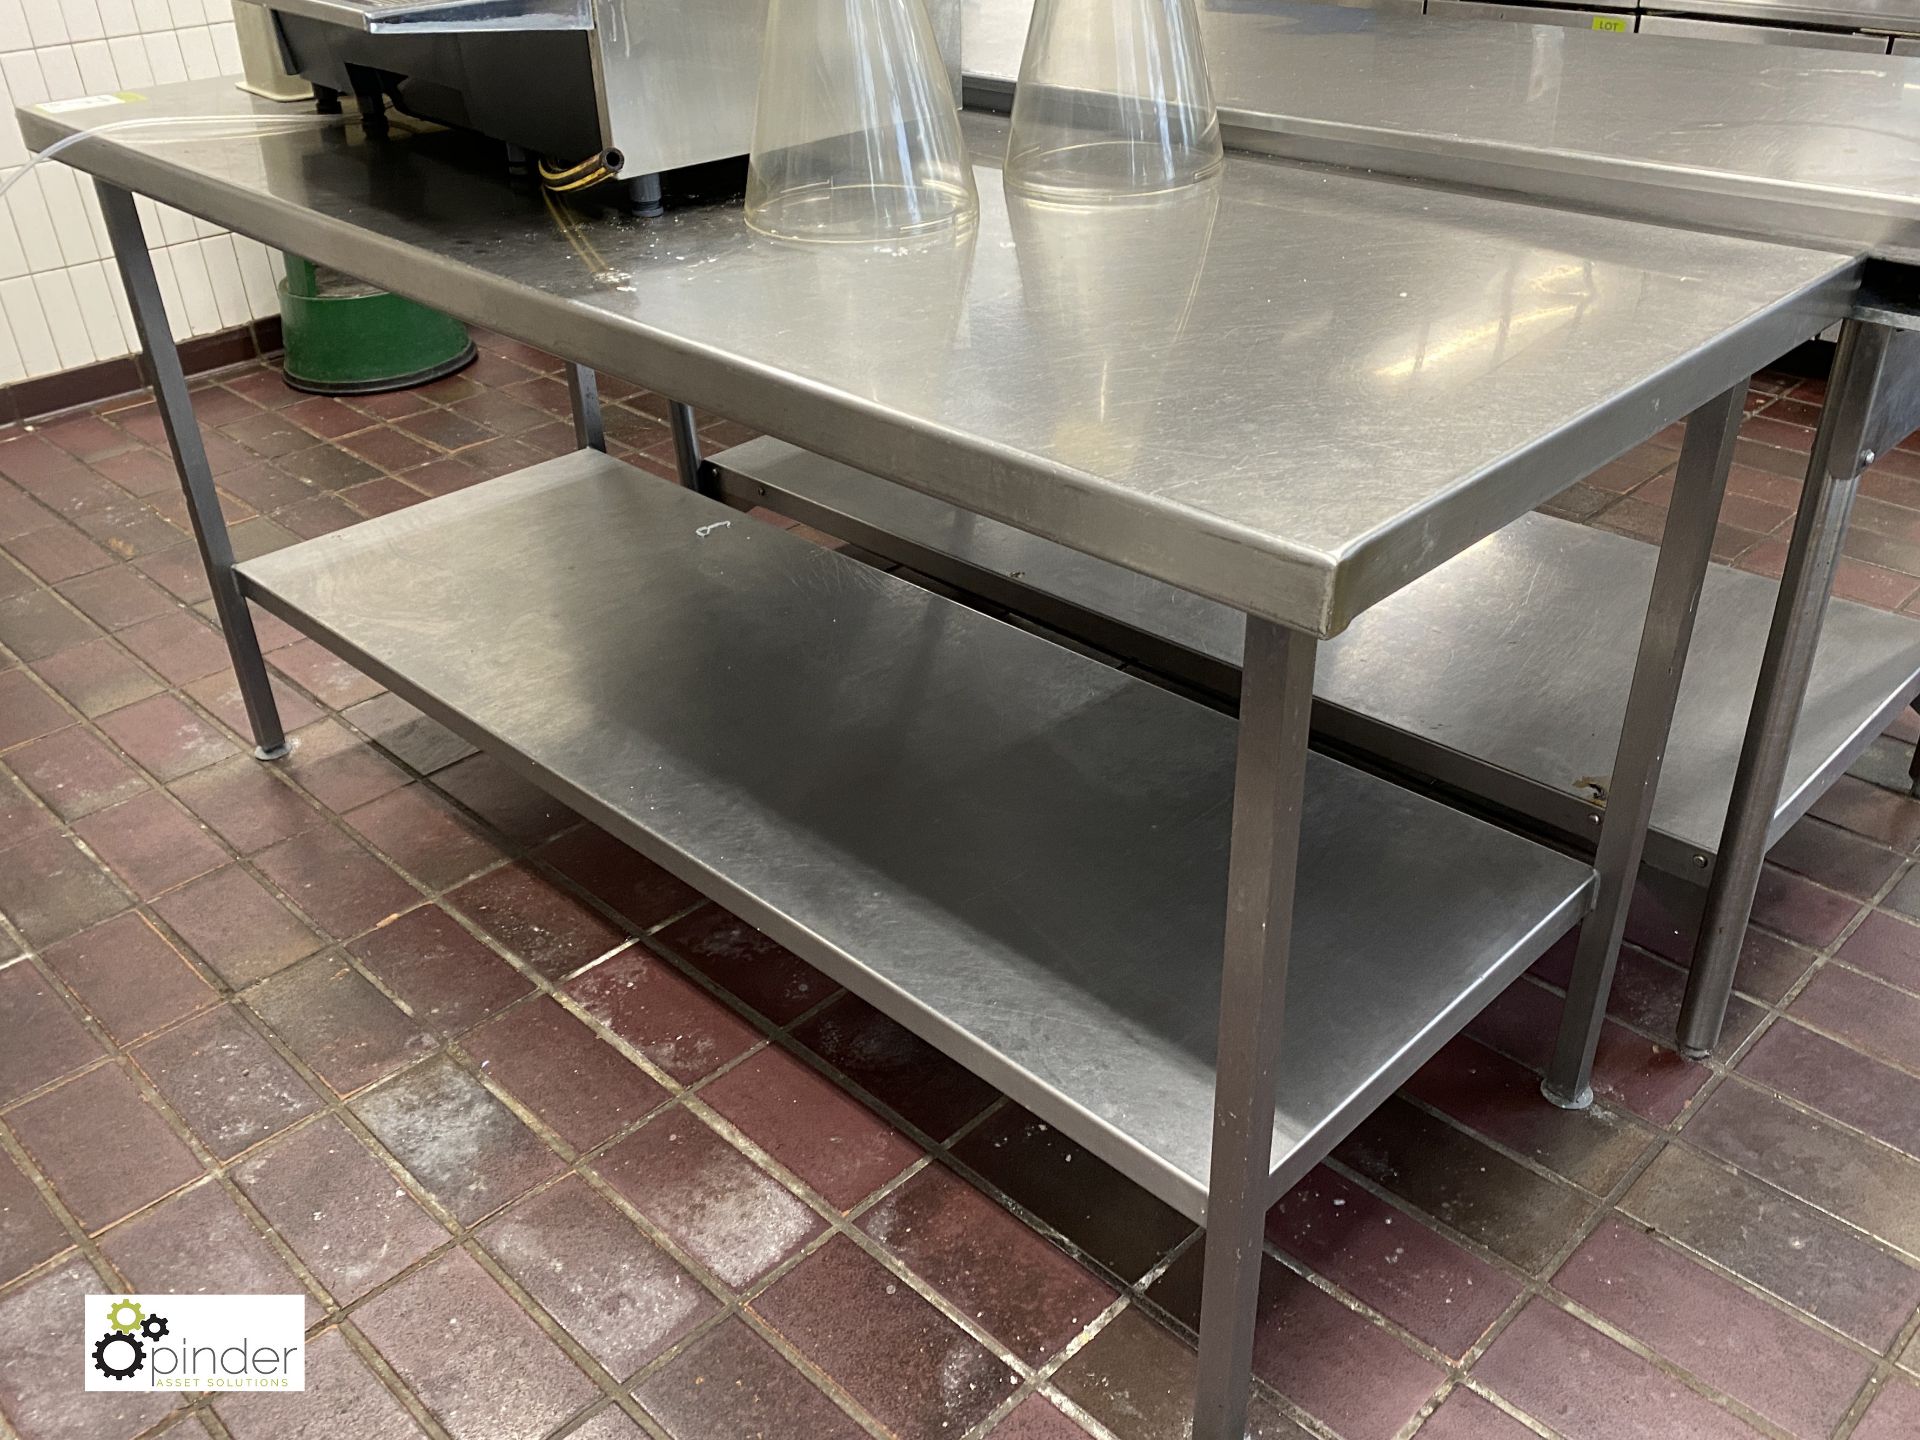 Stainless steel Preparation Table, 1750mm x 690mm x 850mm, with undershelf - Image 2 of 2